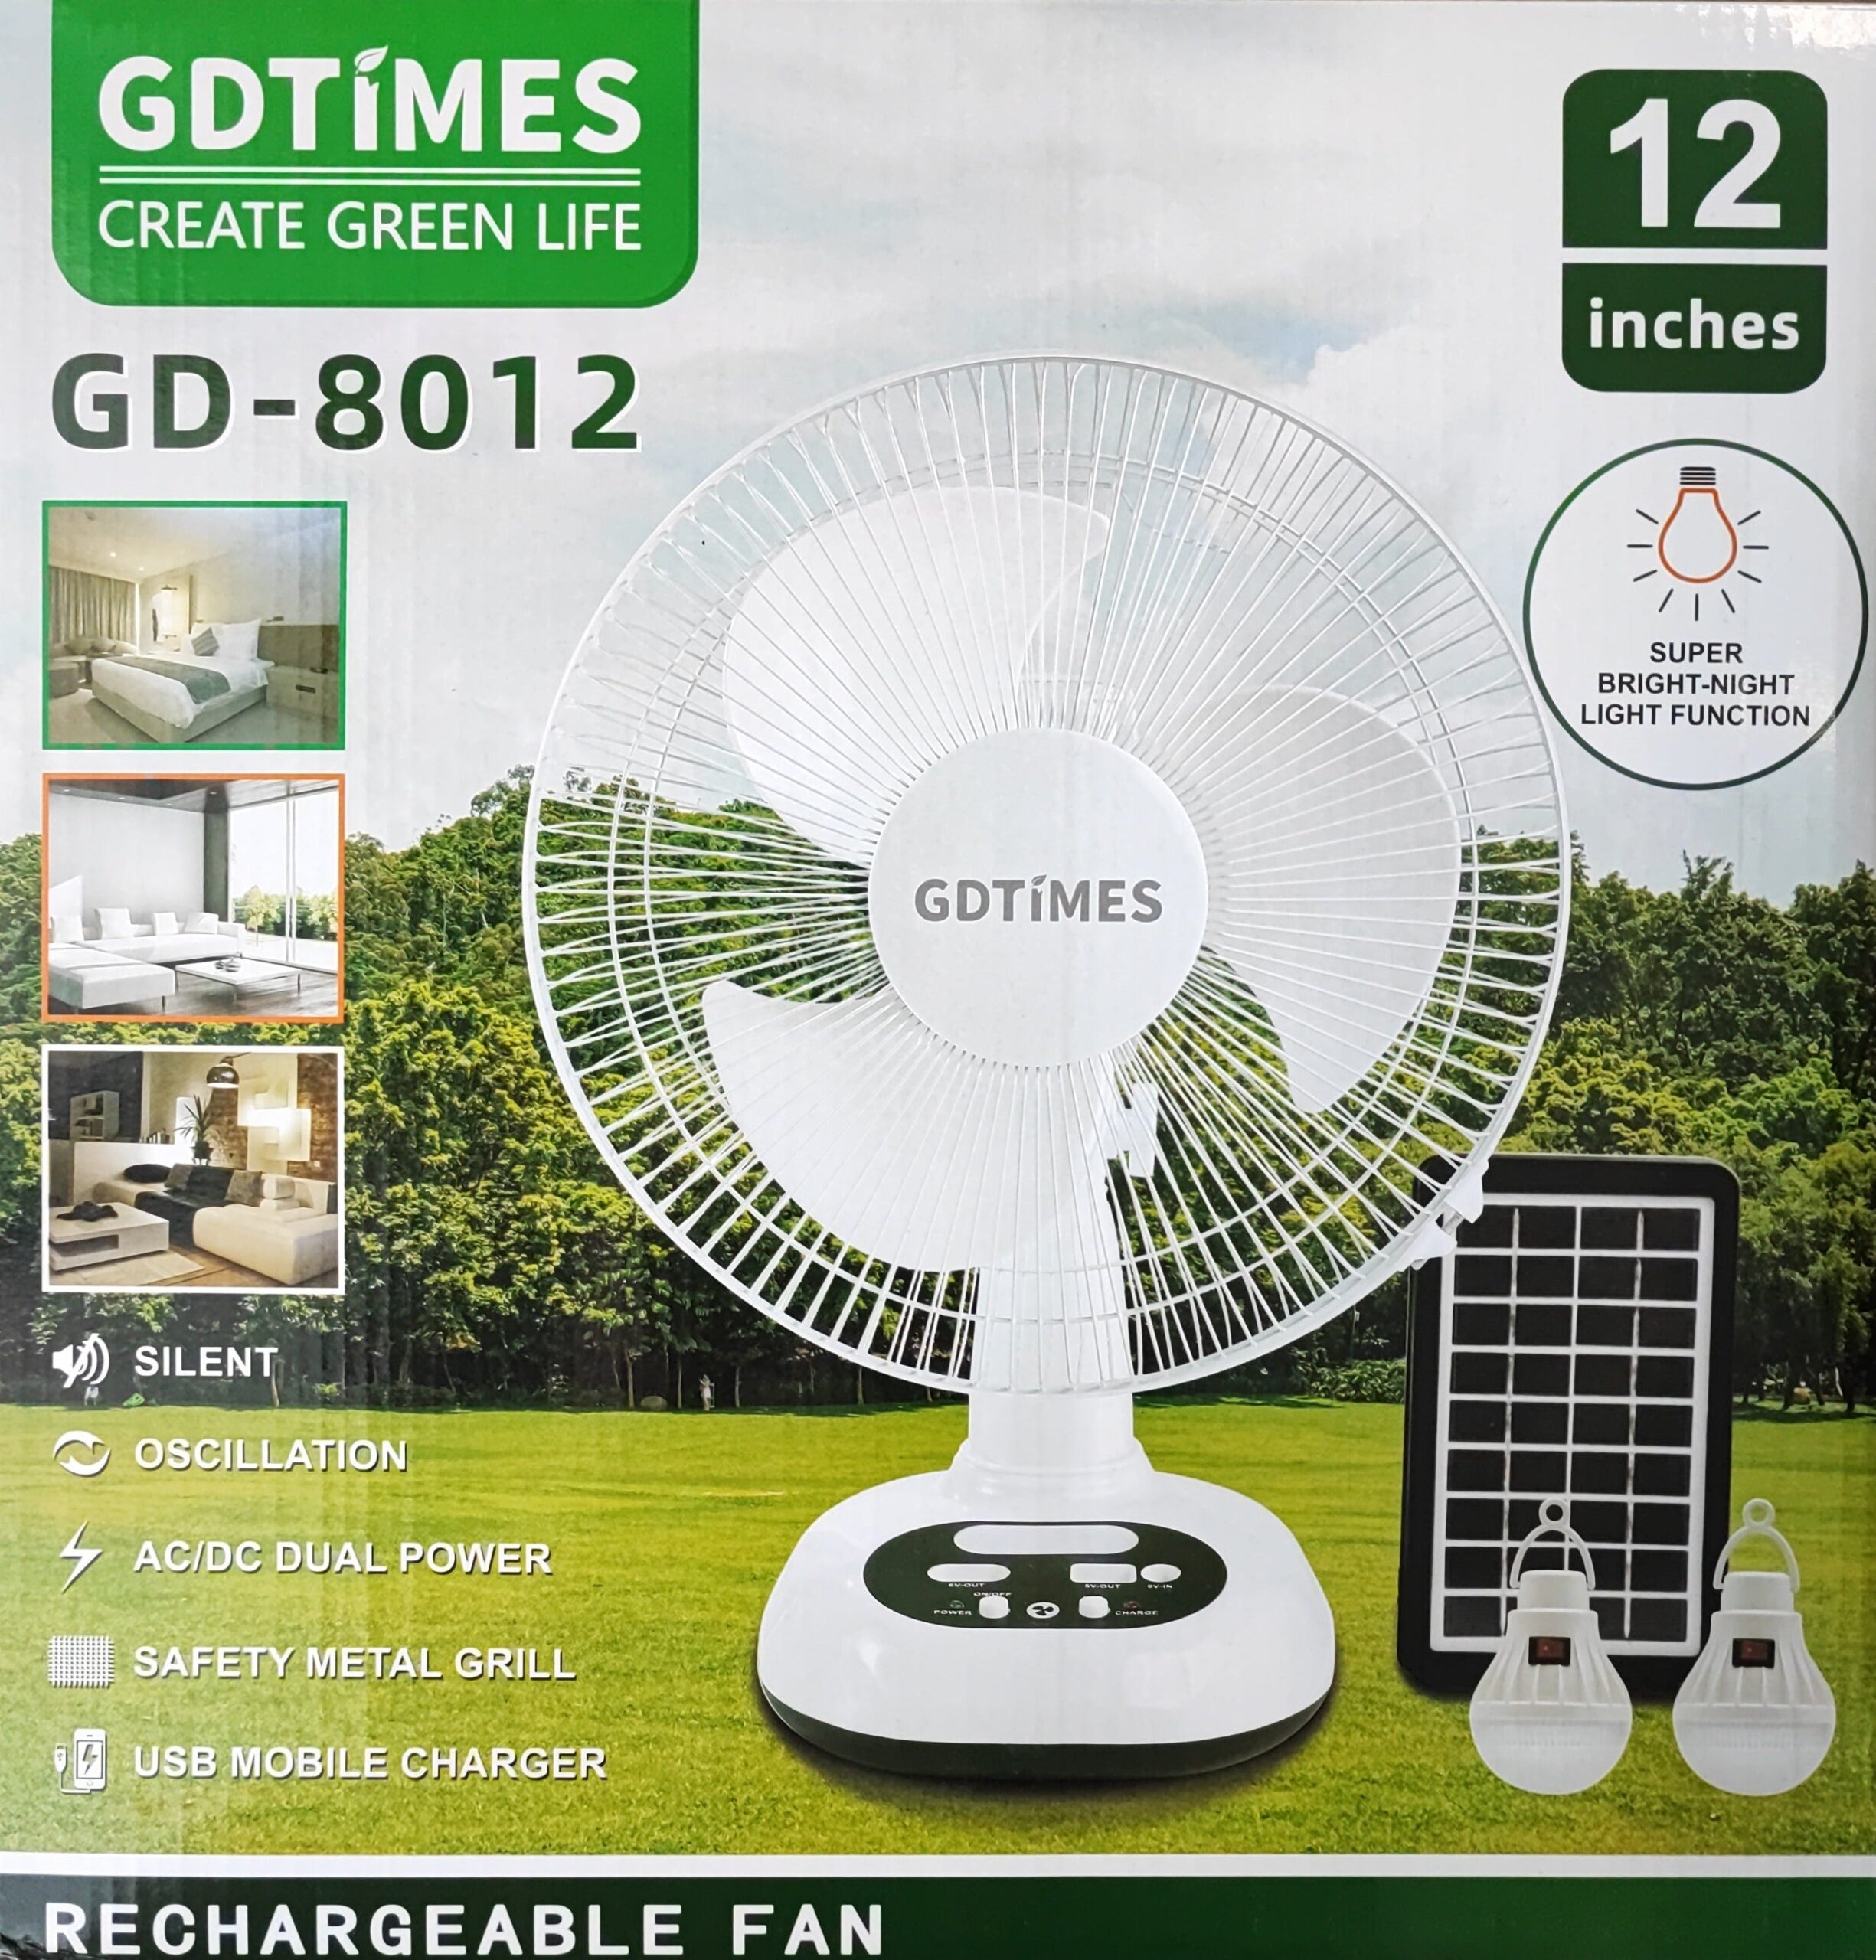 GDTIMES 12Inch Solar Rechargeable Fan and LED Light Kit